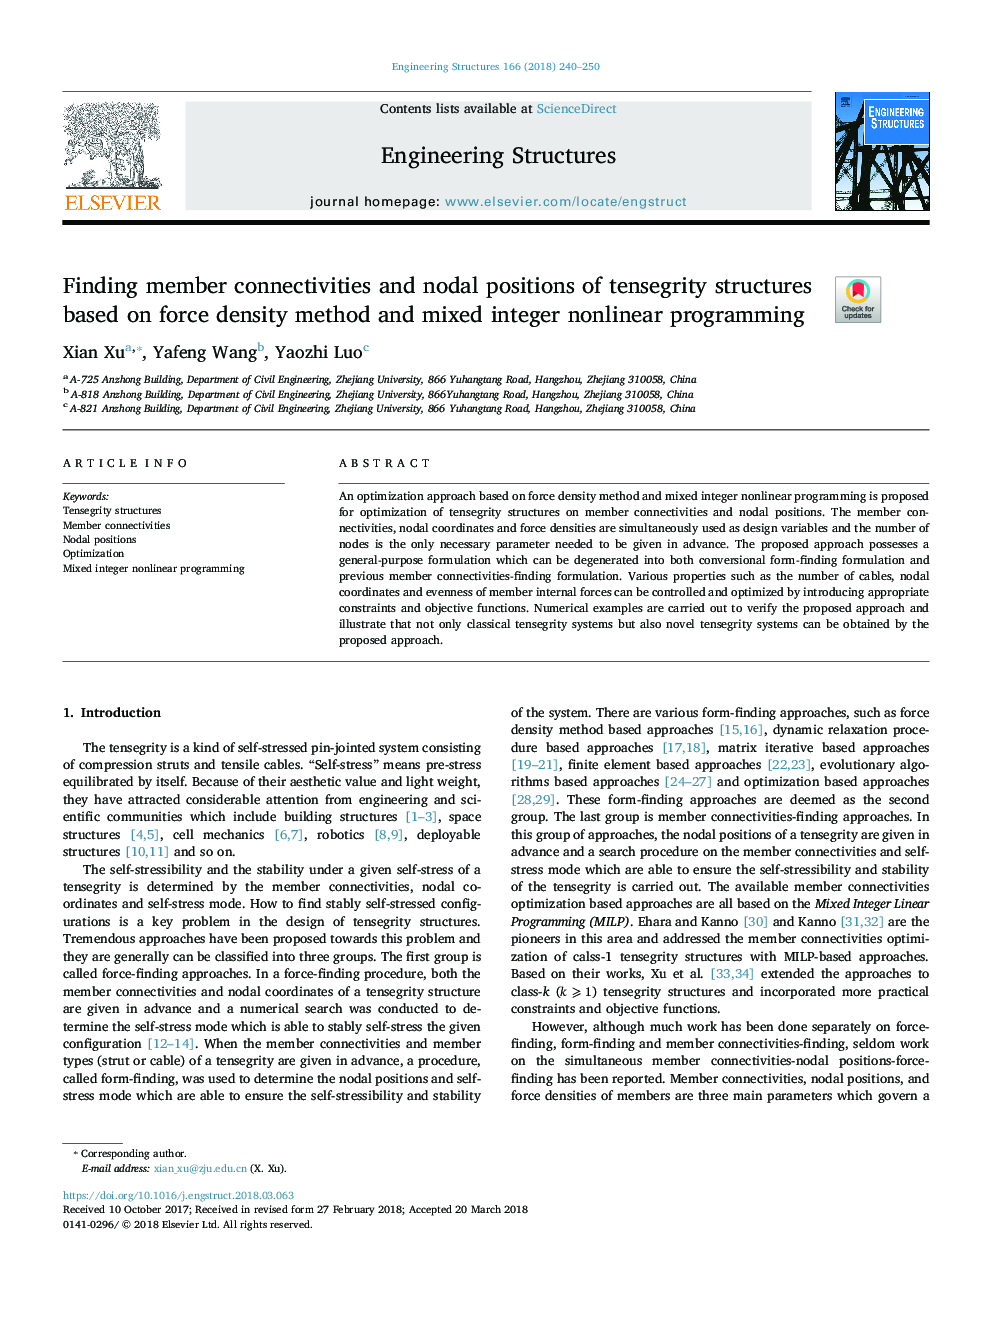 Finding member connectivities and nodal positions of tensegrity structures based on force density method and mixed integer nonlinear programming